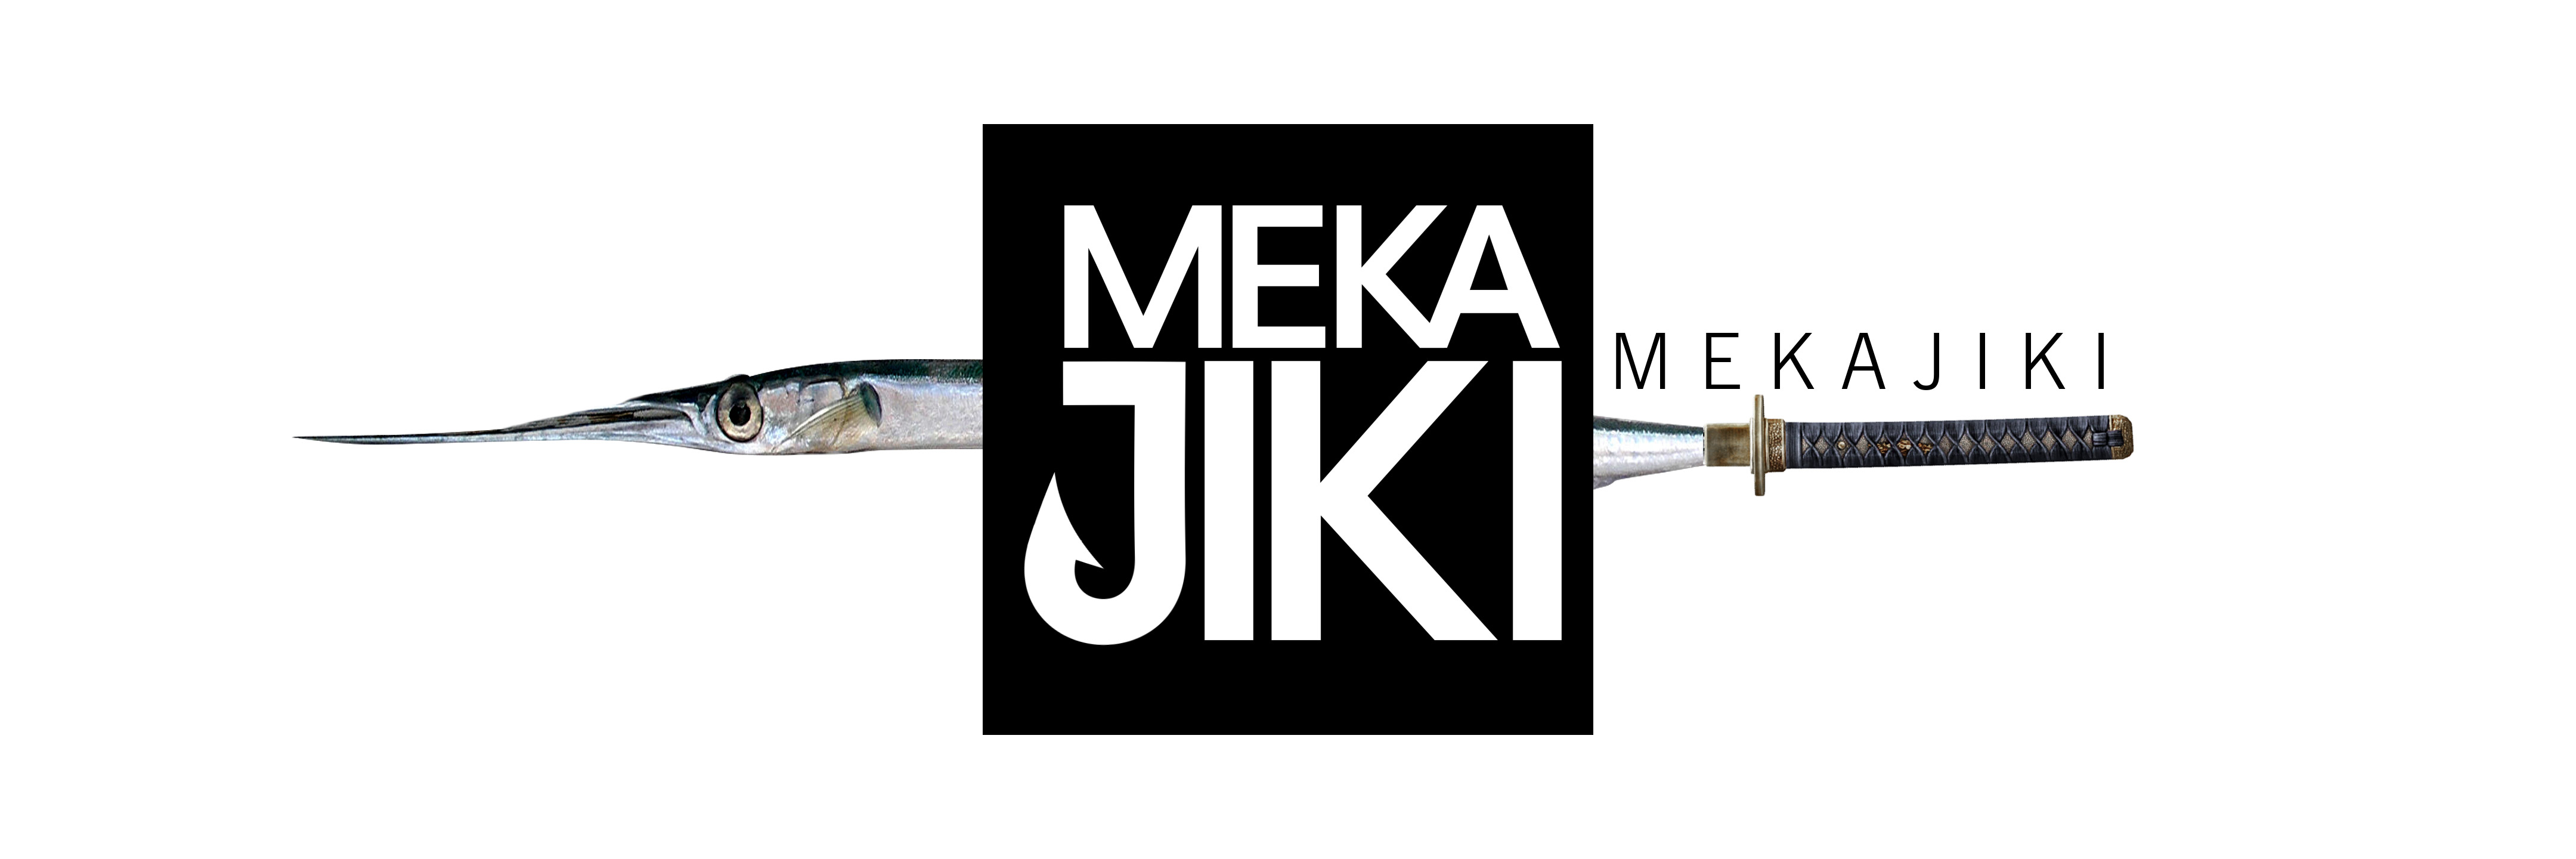 Mekajiki is a team of filmmakers, designers, animators, and technologists who live to design memorable pictures in motion.